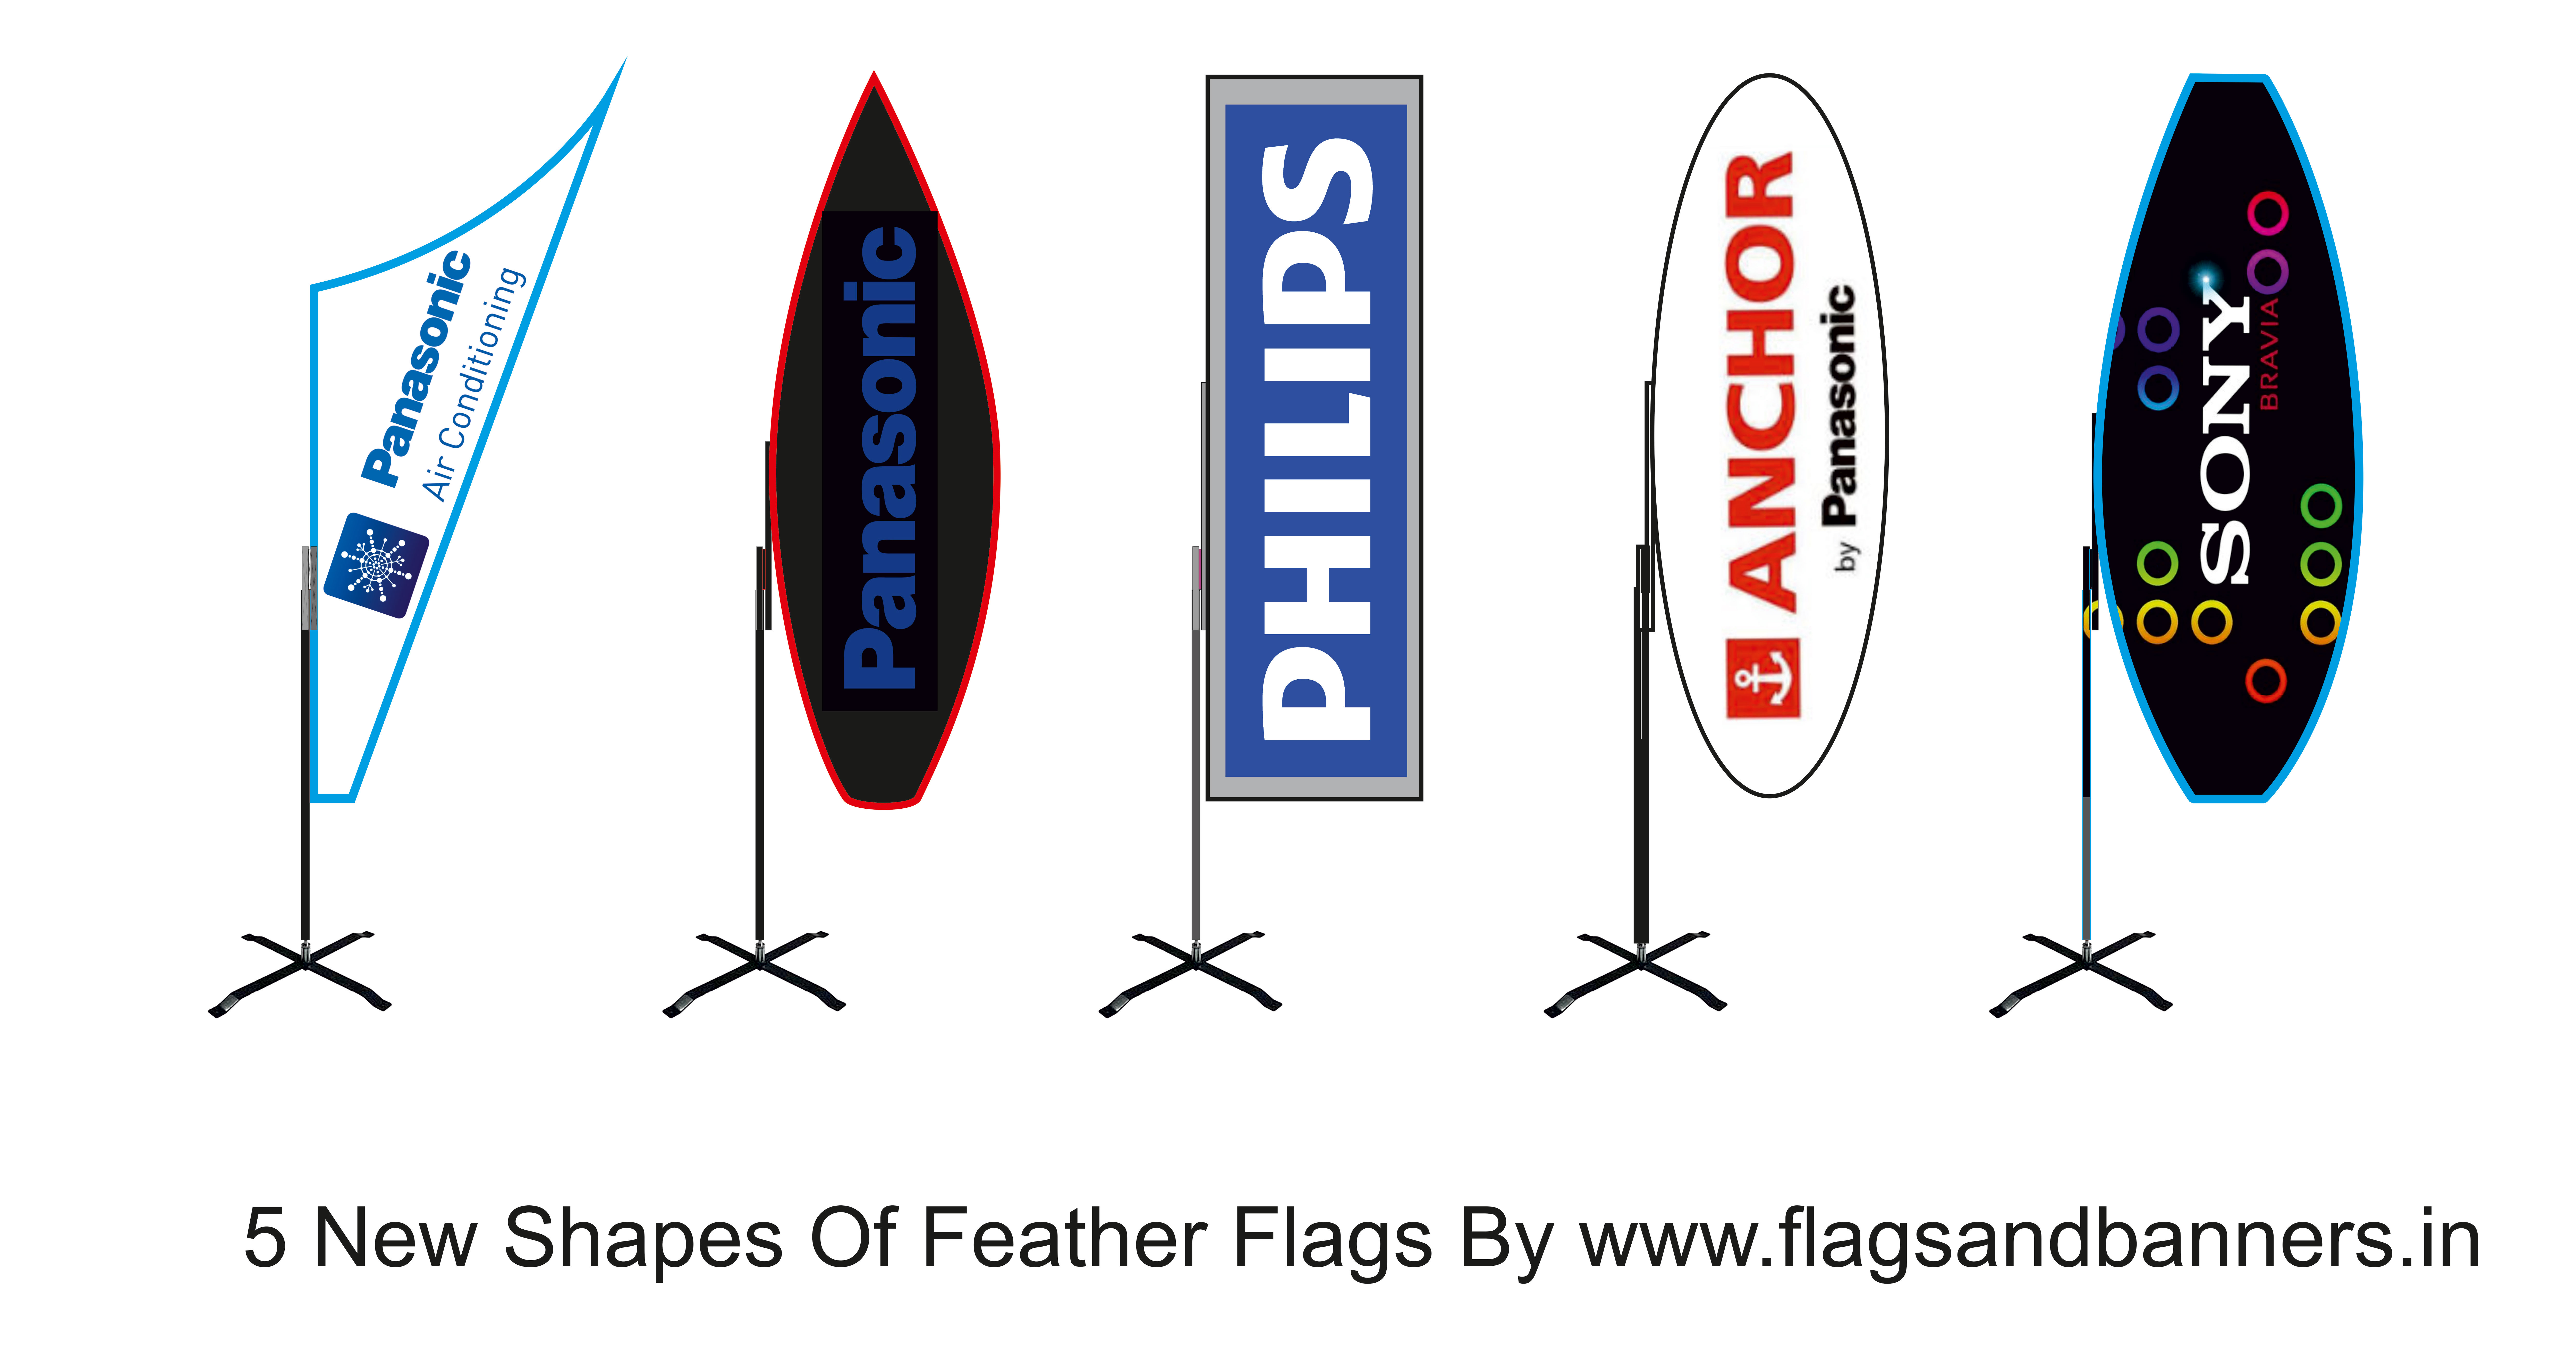 5 New Shapes of Feather Flags